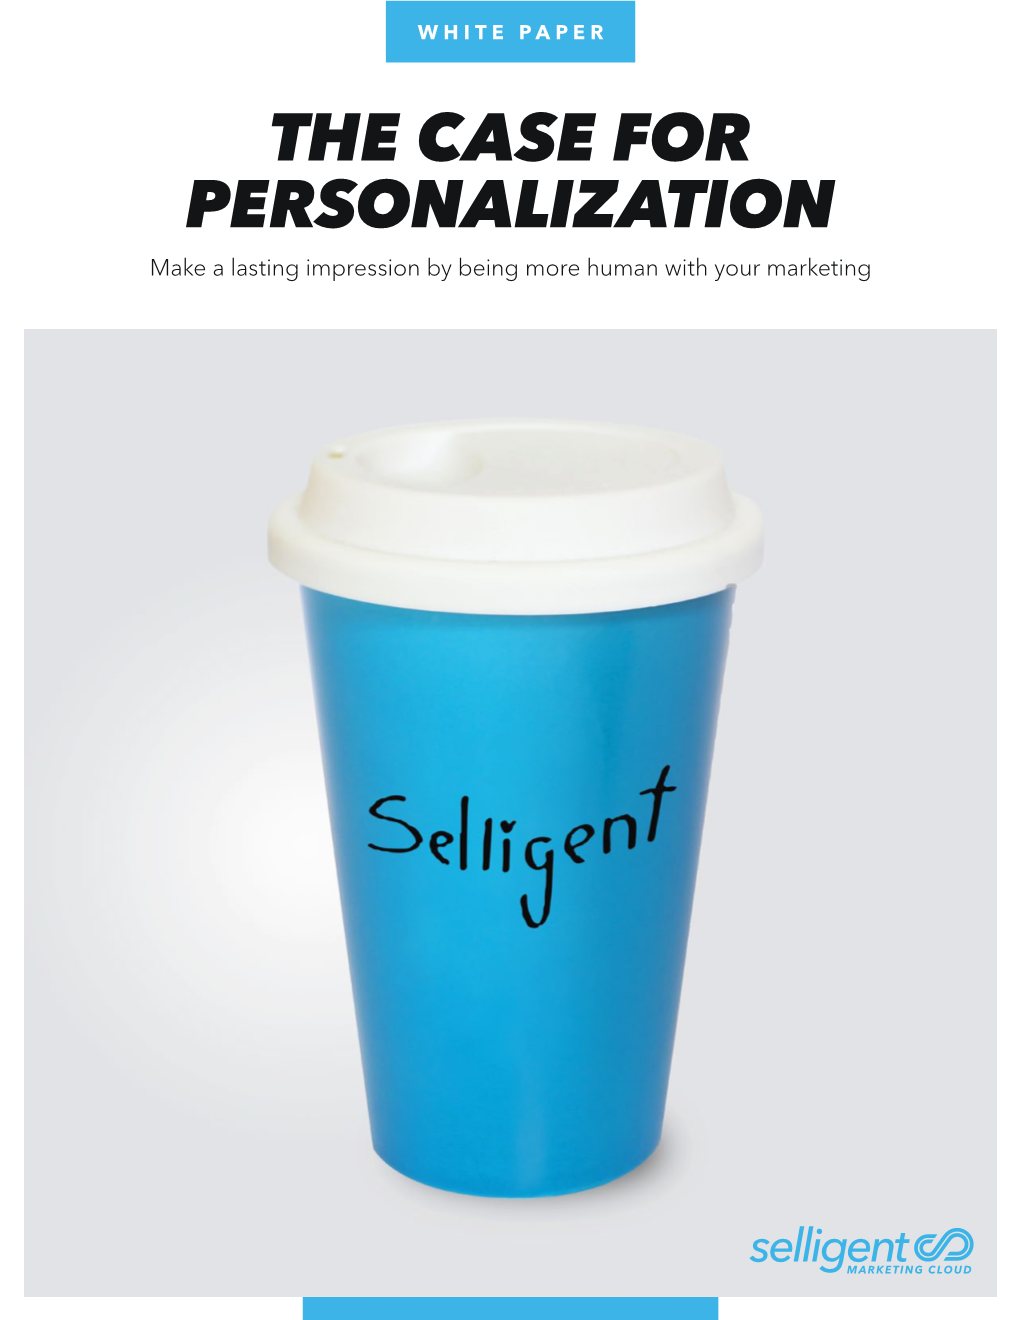 THE CASE for PERSONALIZATION Make a Lasting Impression by Being More Human with Your Marketing